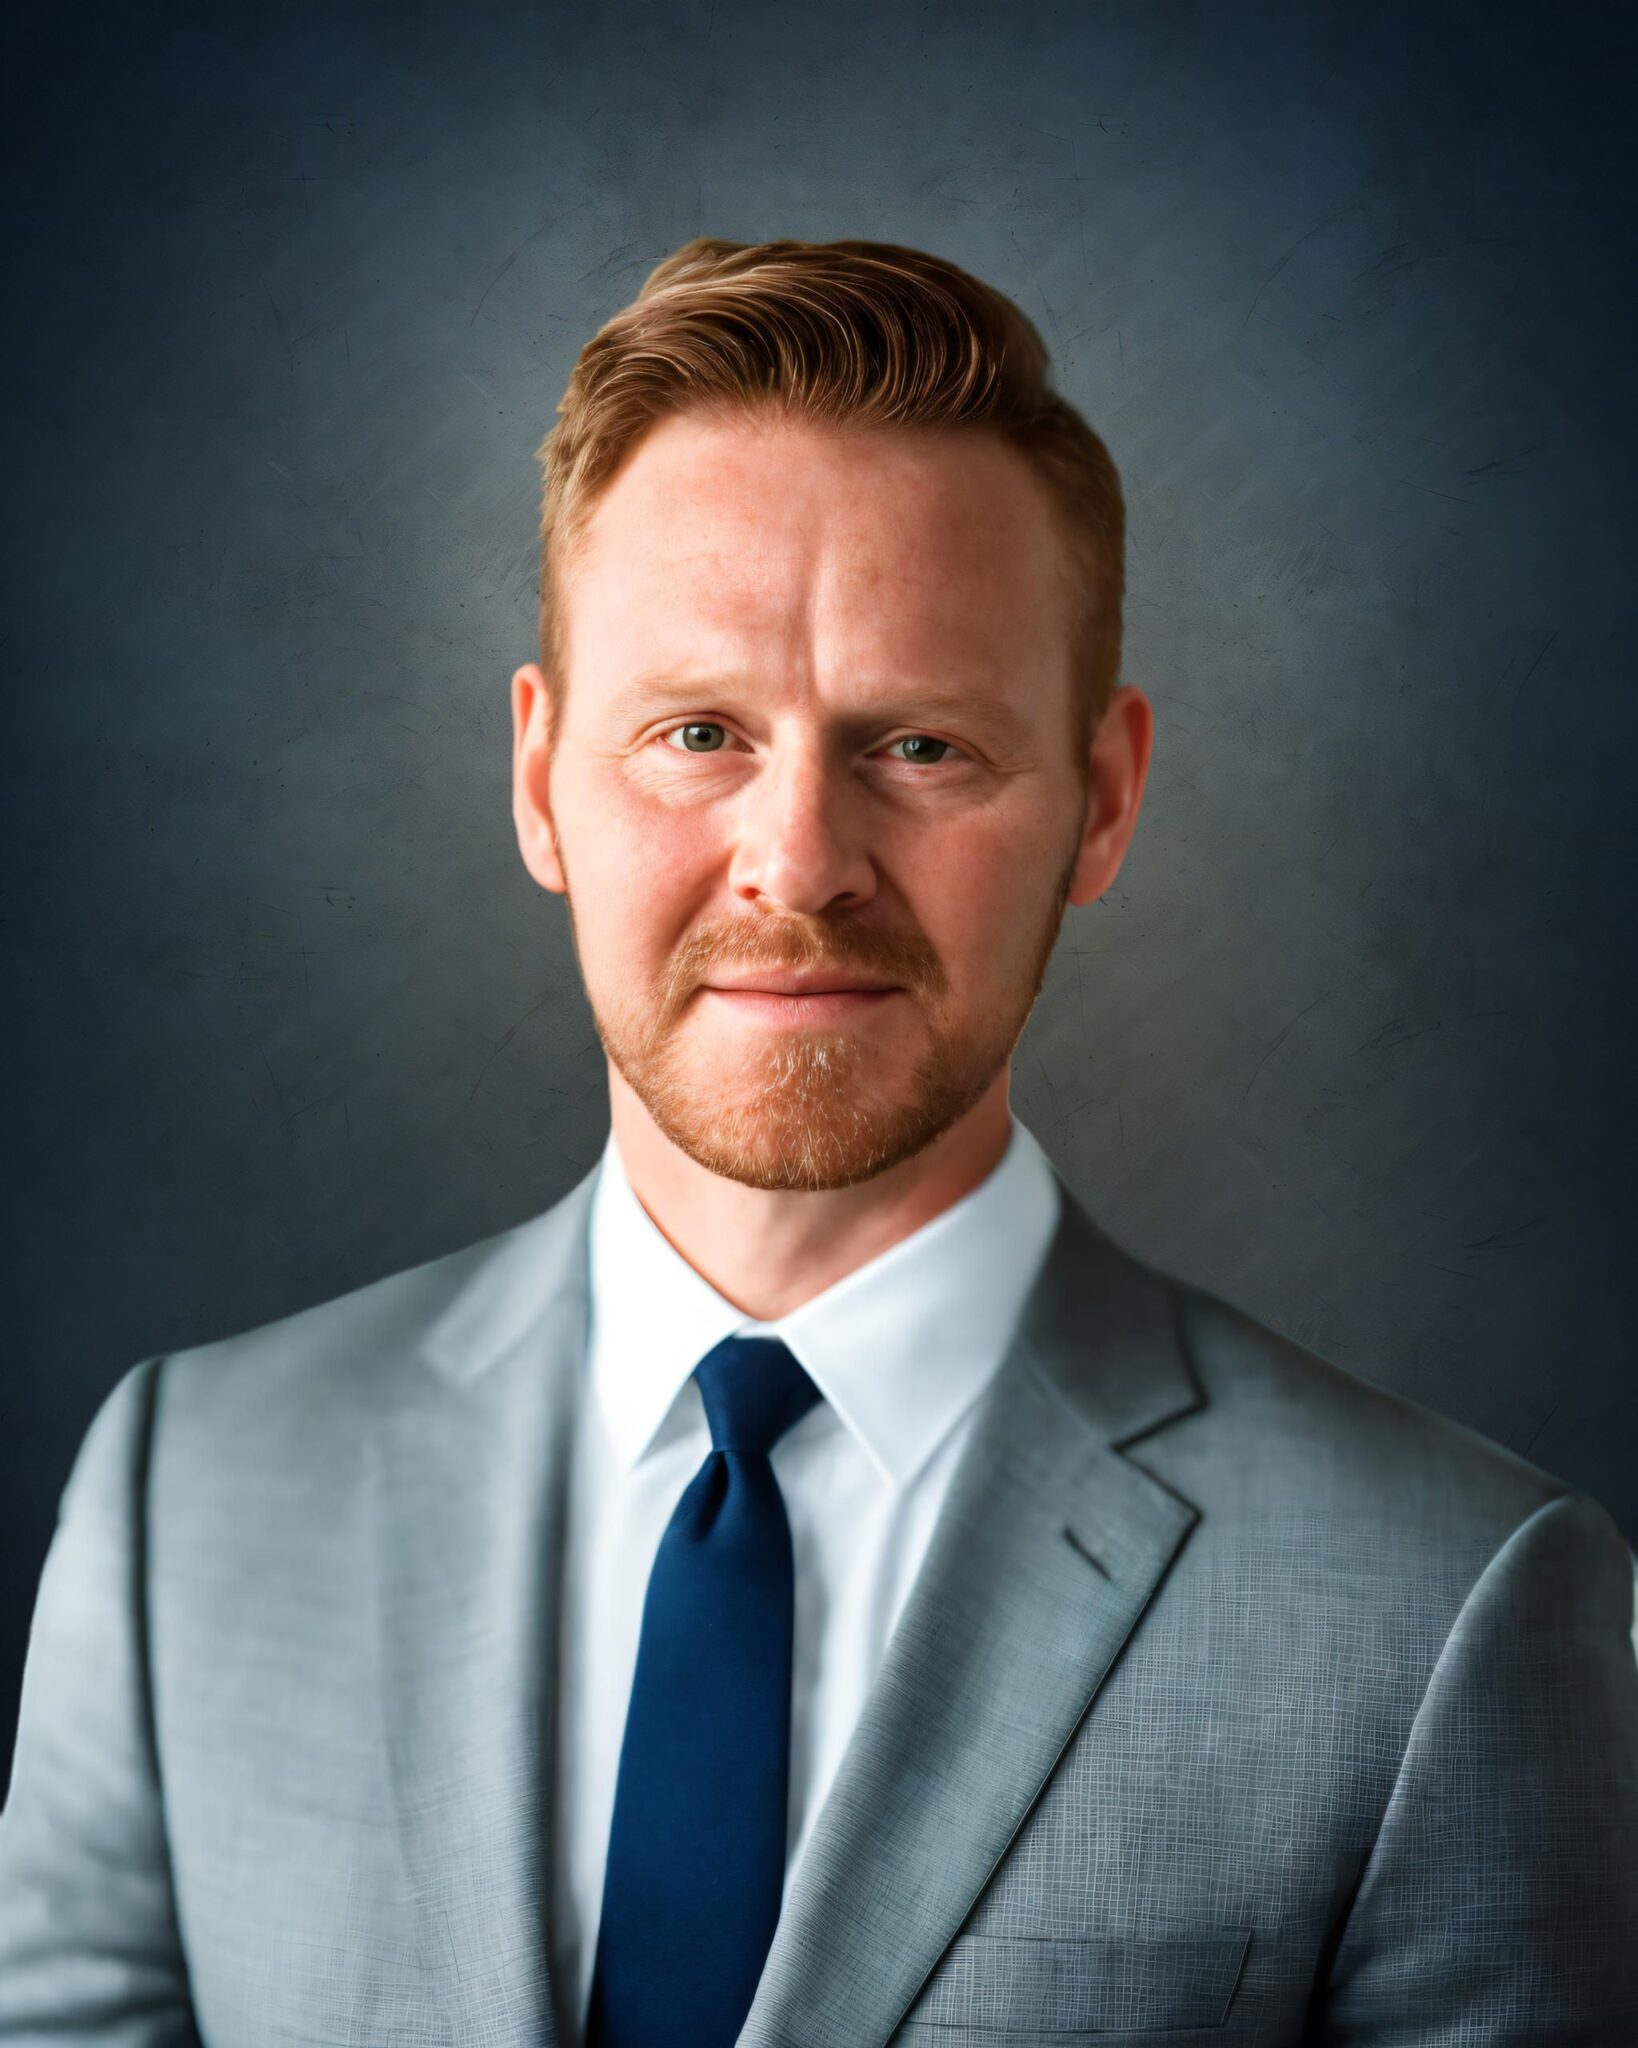 Headshot of UAF CTC dean candidate Carl Bishop, wearing a grey suit and navy tie